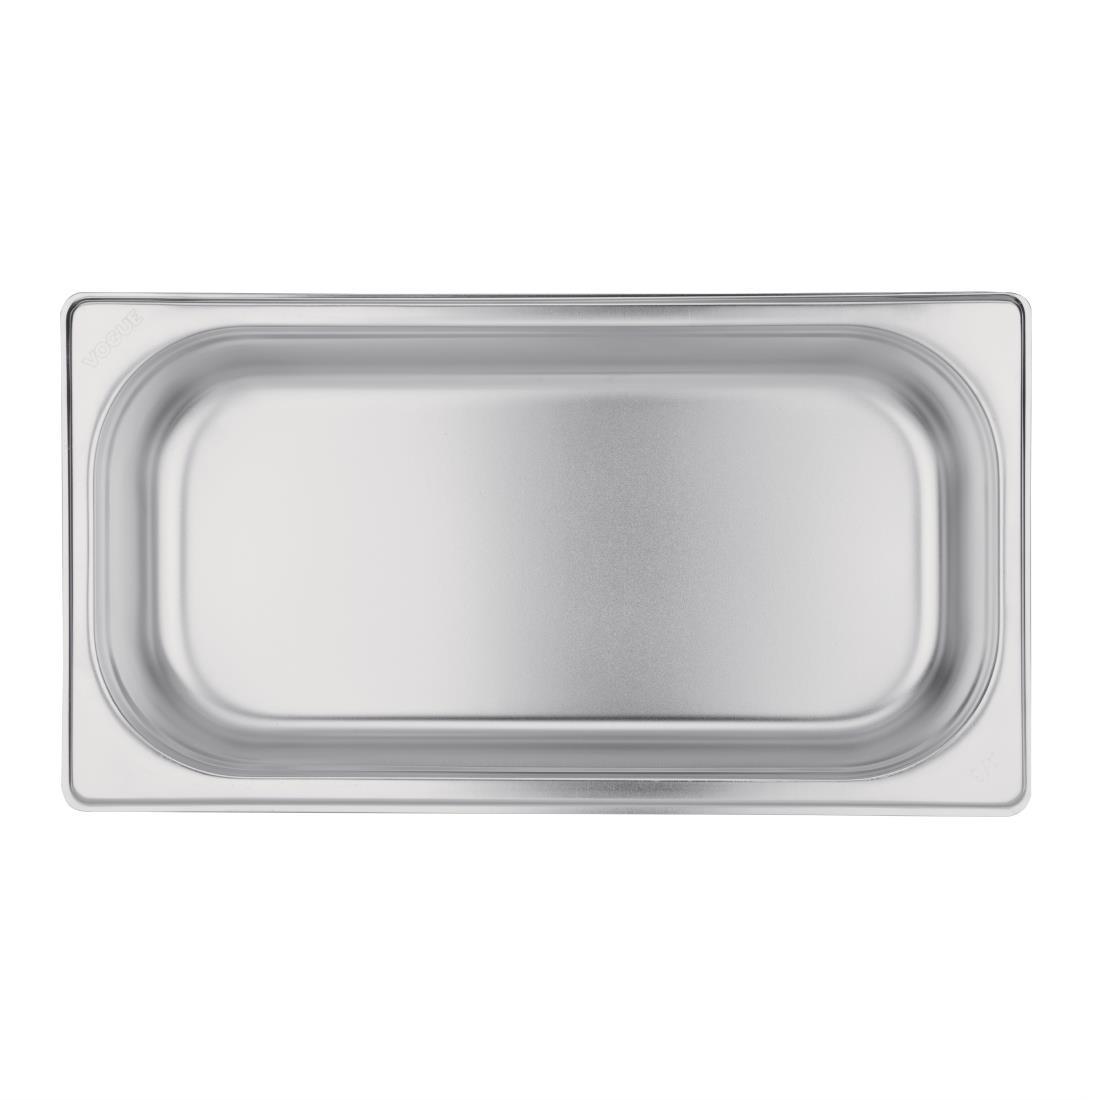 Vogue Stainless Steel 1/3 Gastronorm Pan 65mm - K929  - 4